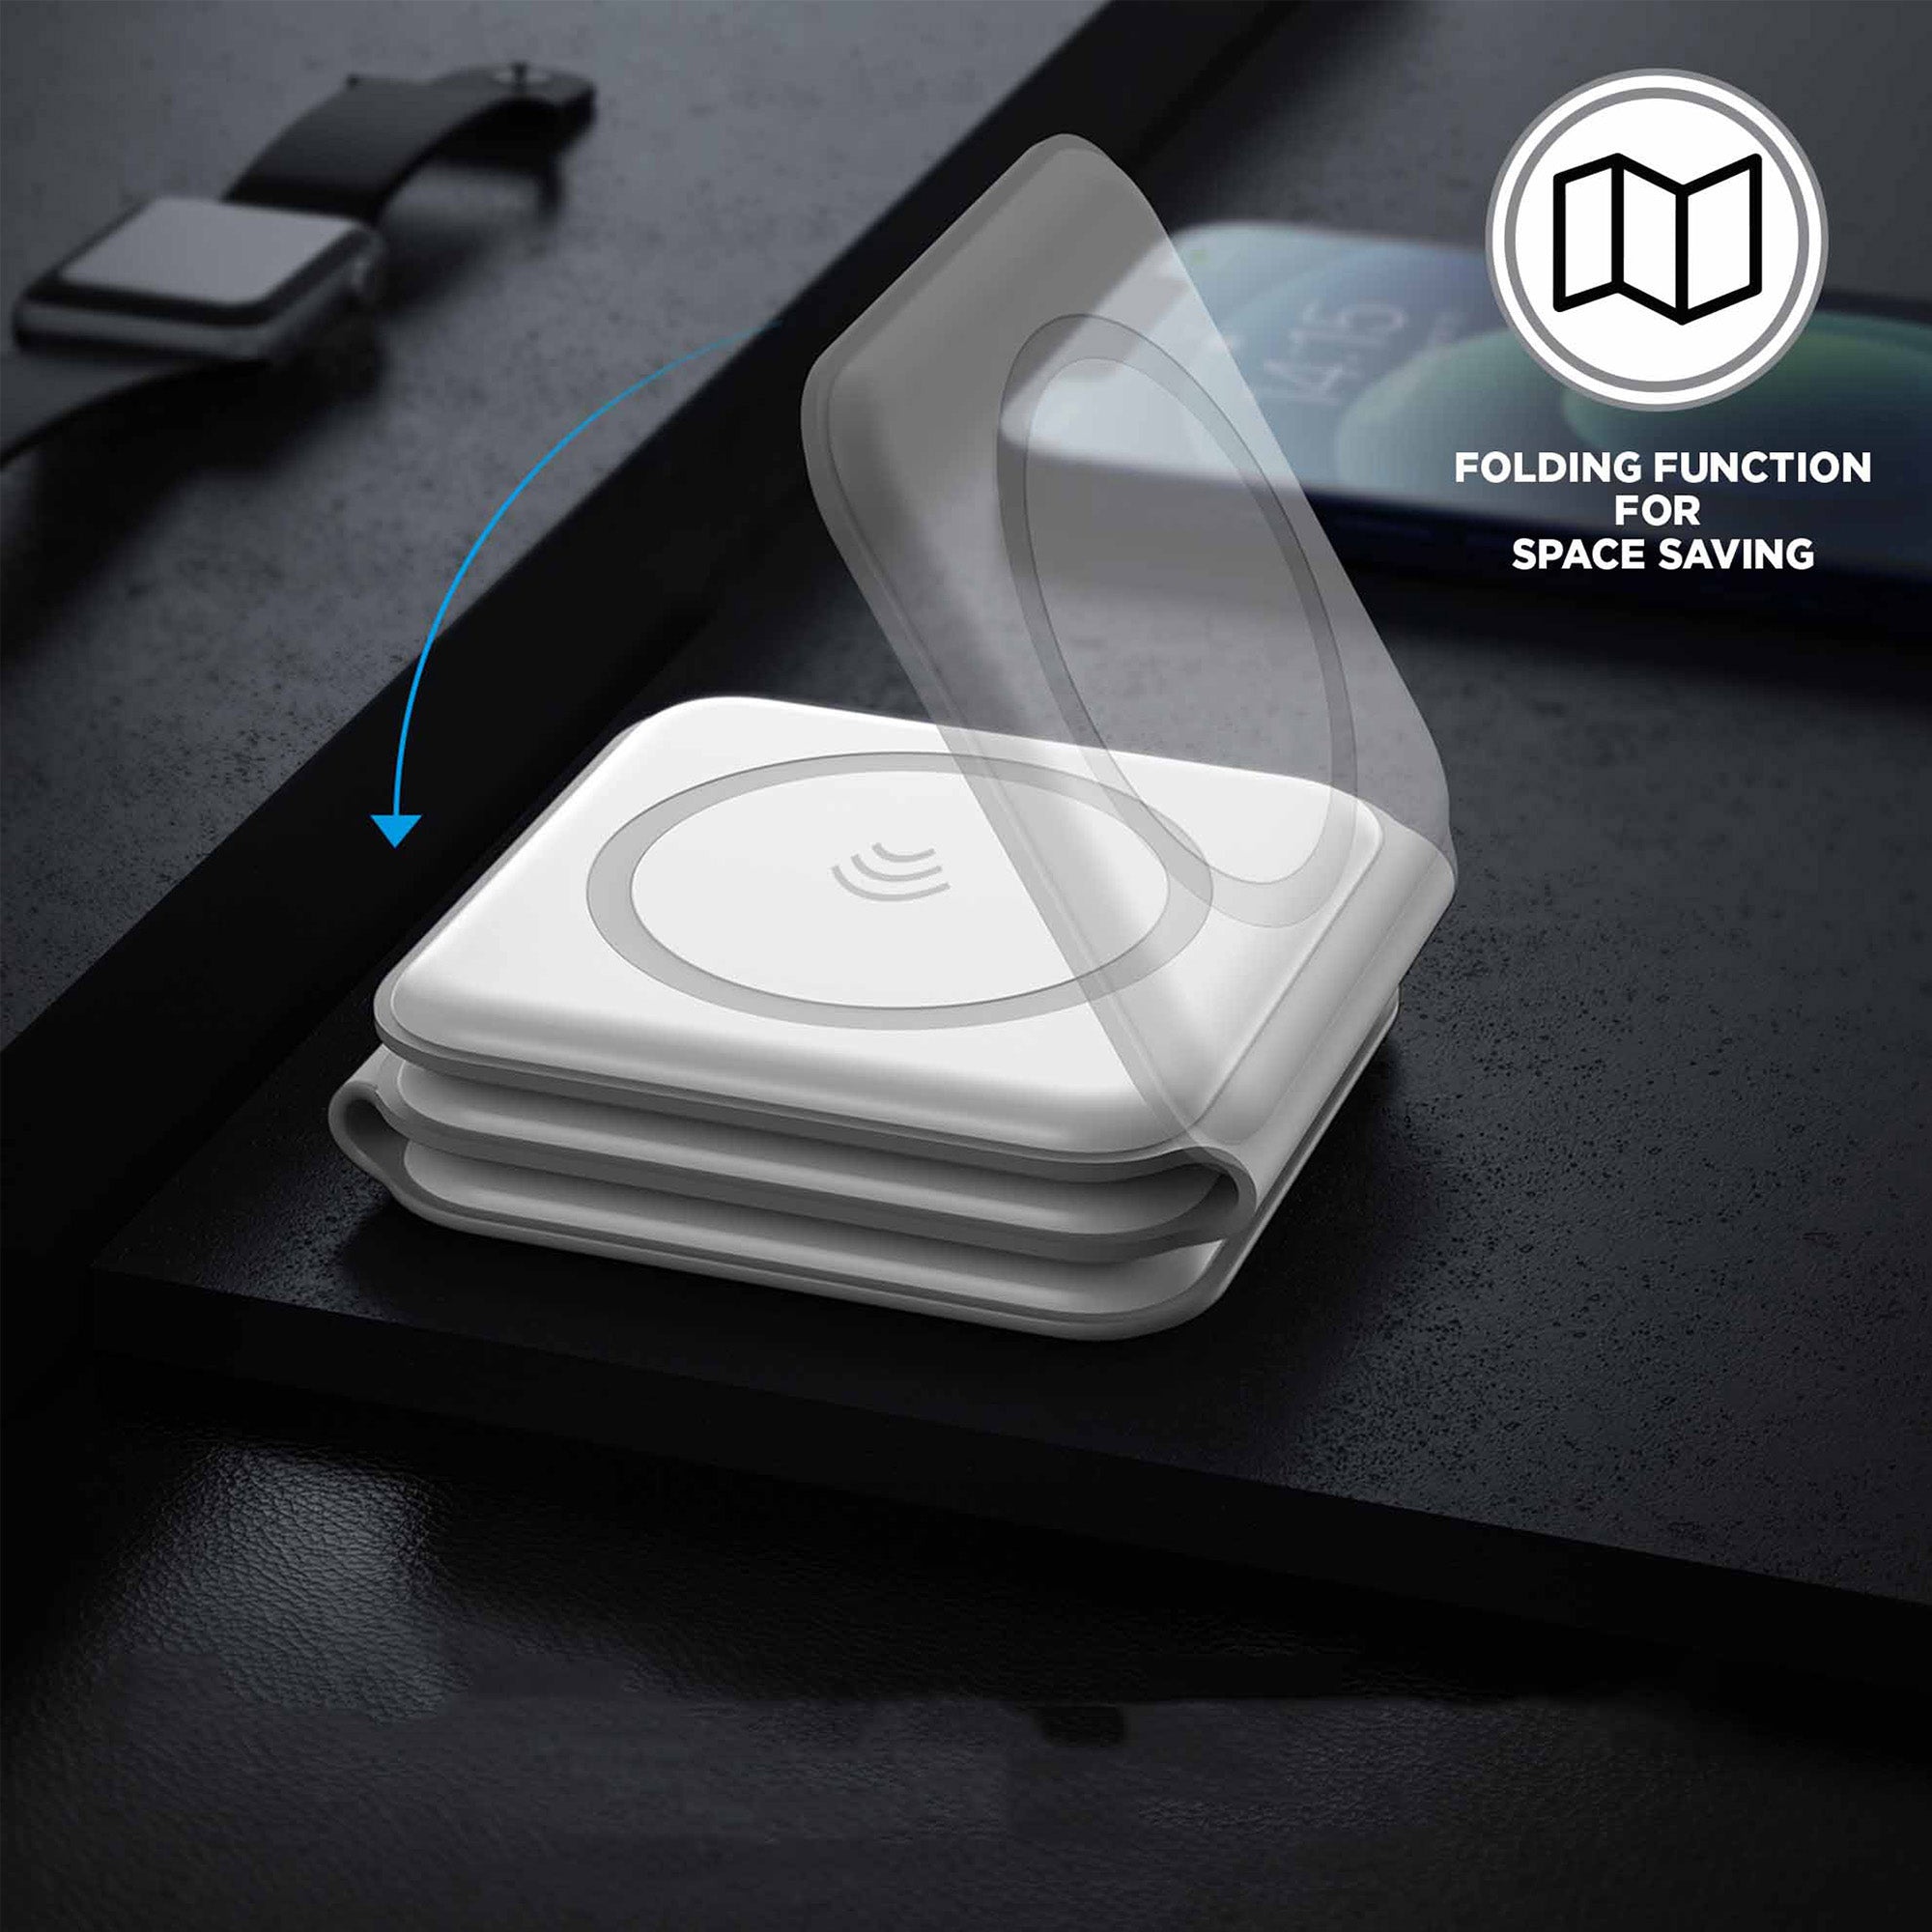 Uunique 15W Trio 3in1 Magnetic Foldable Wireless Charger - White - 15-09232